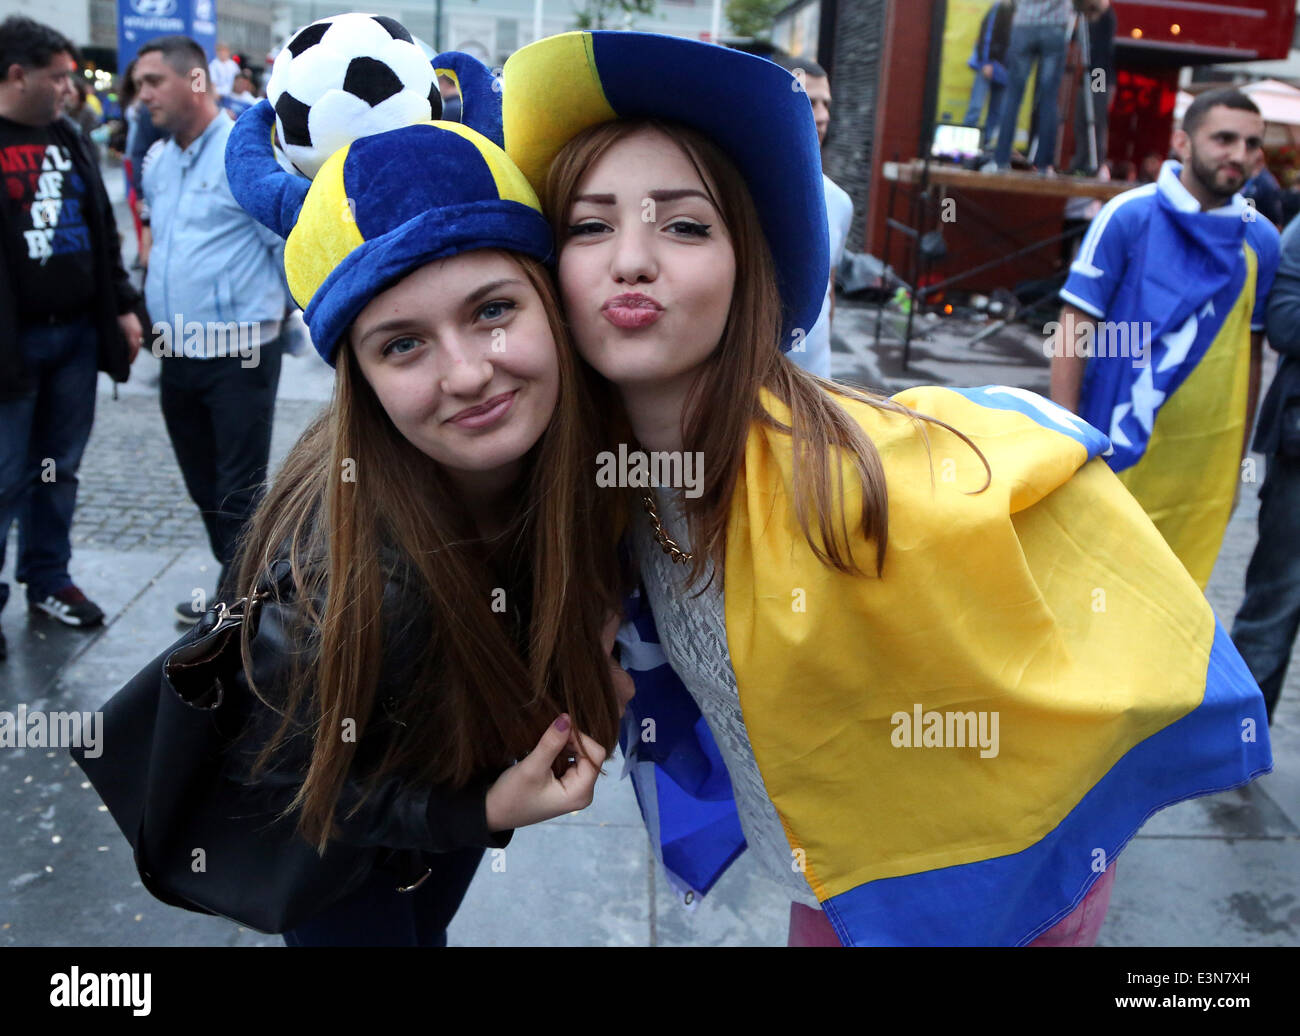 Sarajevo, Bosnia Herzegovina. 25th June, 2014. Fans cheer for the team as they watch the televised 2014 FIFA World Cup Group F match between Bosnia and Herzegovina and Iran, in front of the BBI Center at downtown Sarajevo, Bosnia Herzegovina, on June 25, 2014. Bosnia and Herzegovina won the match 3-1 but was disqualified for the knockout stage. © Haris Memija/Xinhua/Alamy Live News Stock Photo